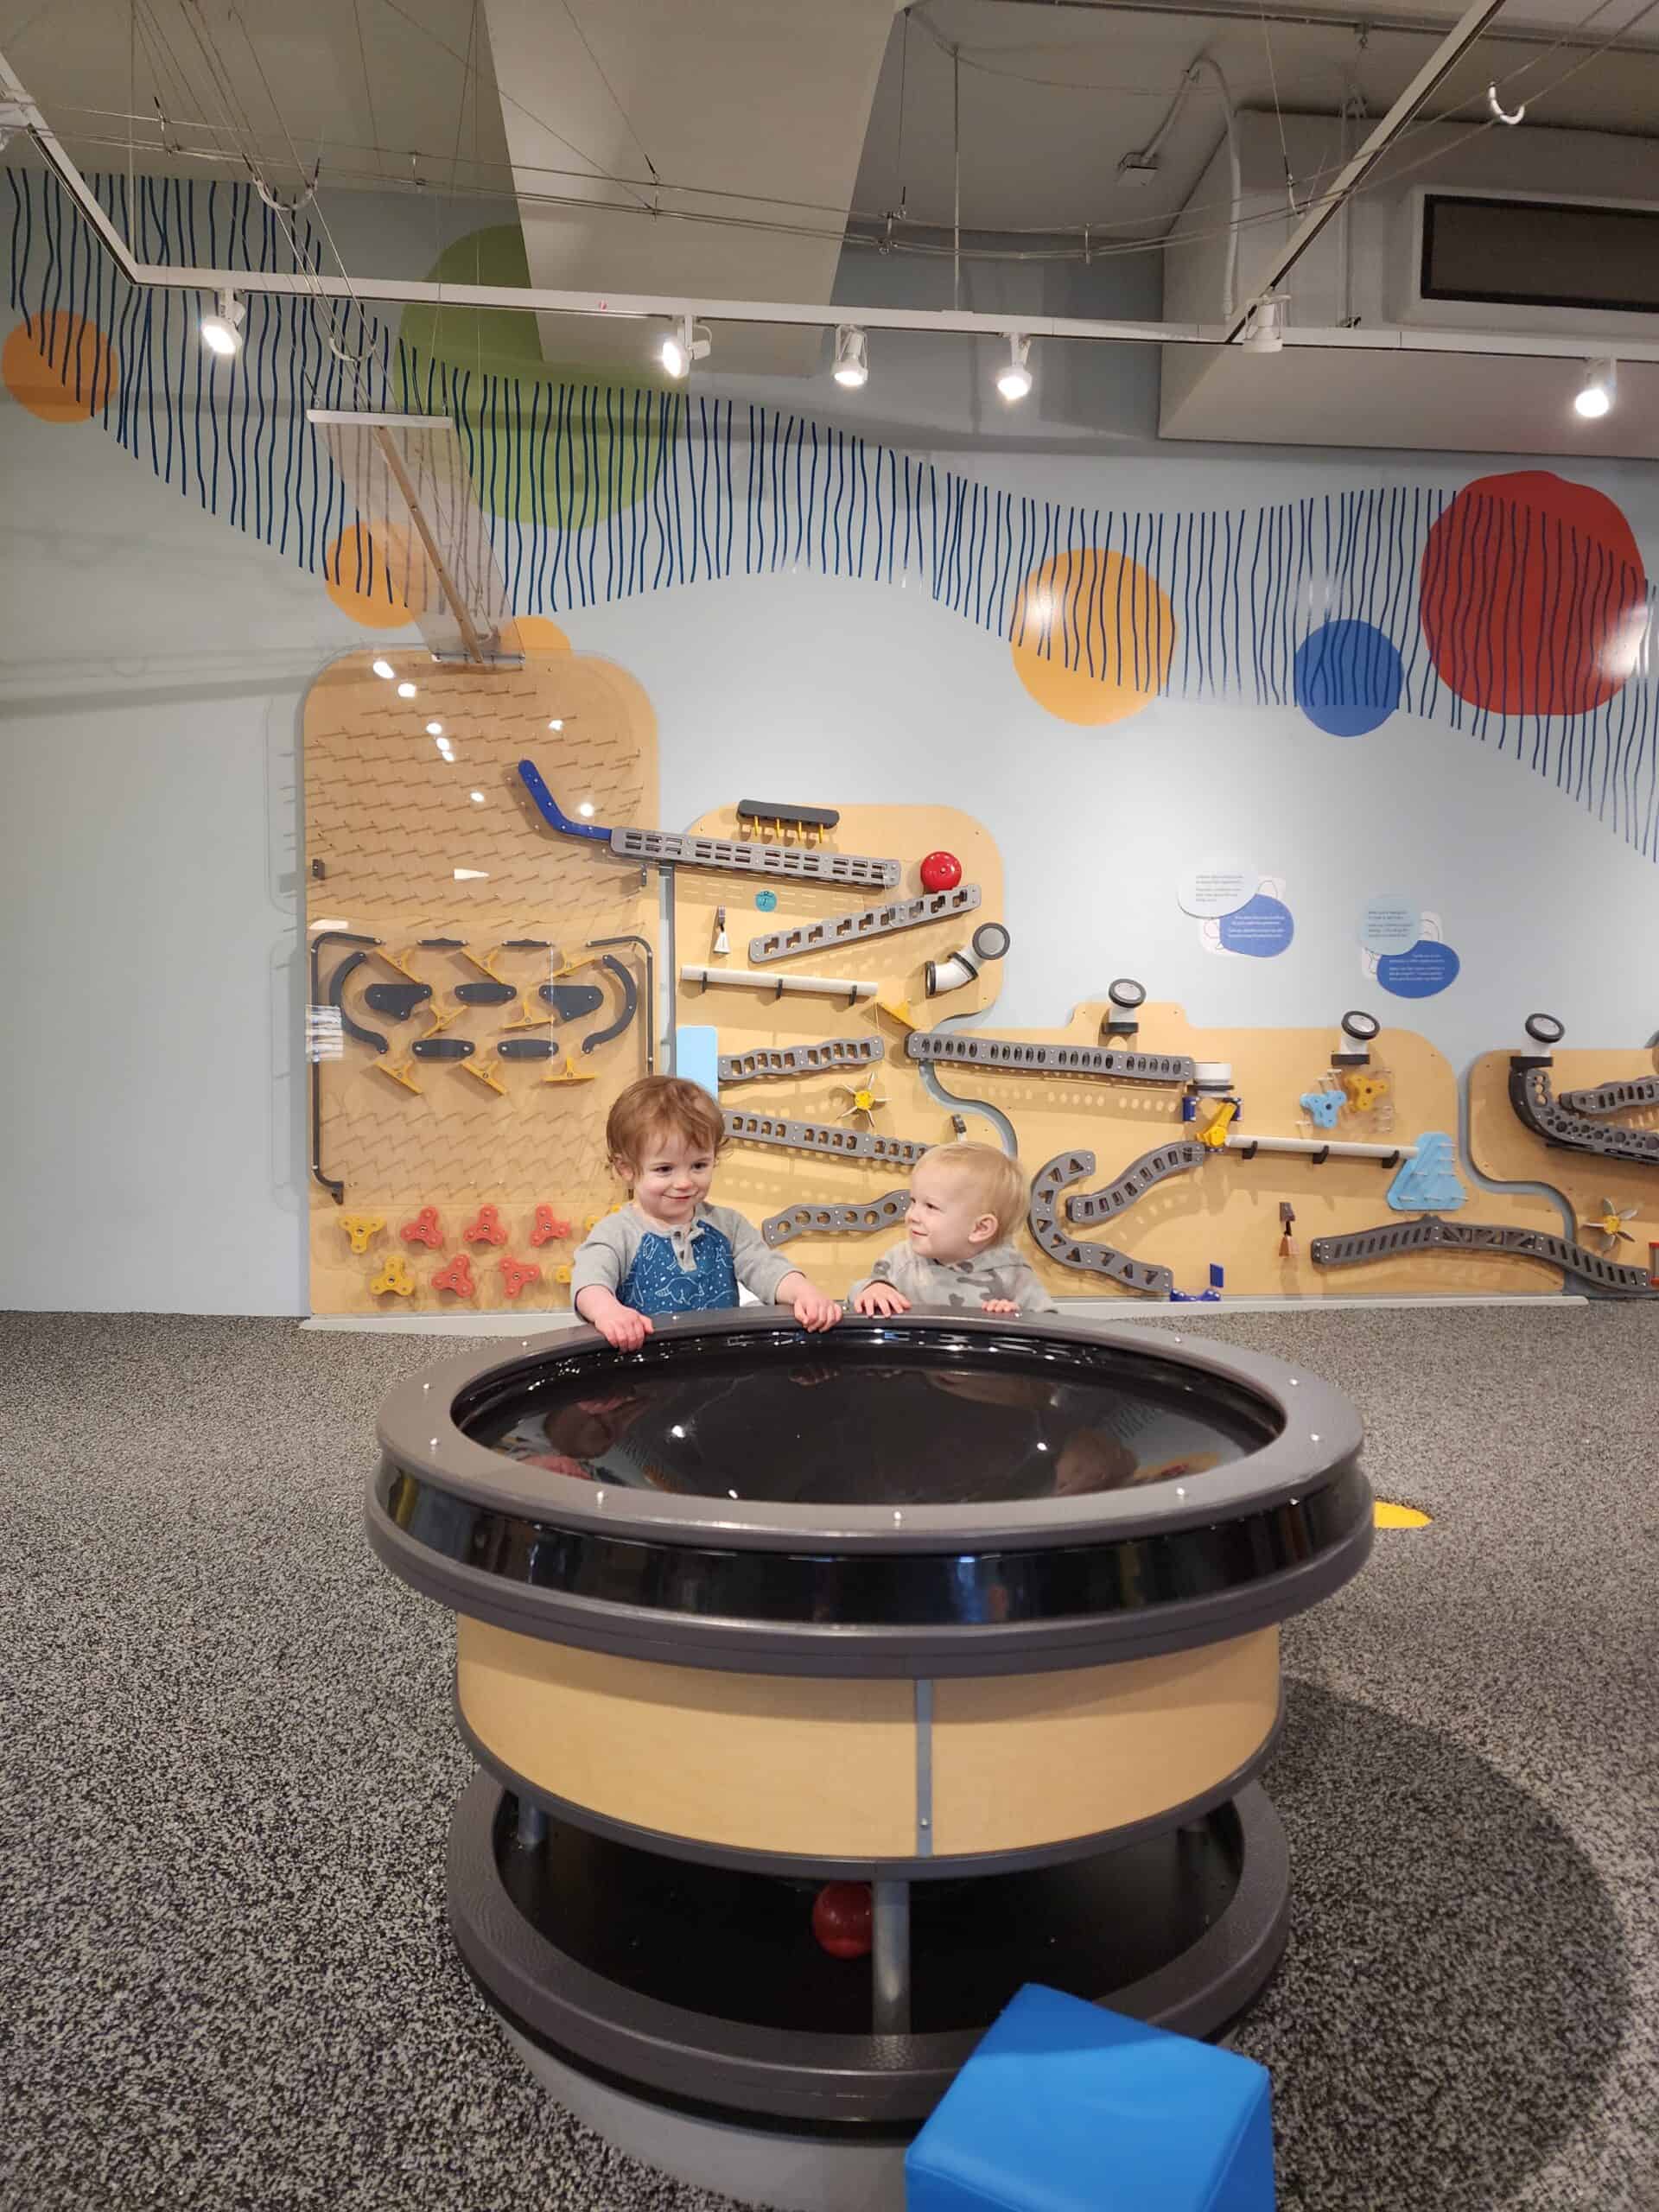 Two young children play together at a circular activity table in a Durham, NC, venue, which is one of the fun and educational things to do with kids in the area. The background is adorned with an interactive wall display featuring ball tracks and colorful patterns